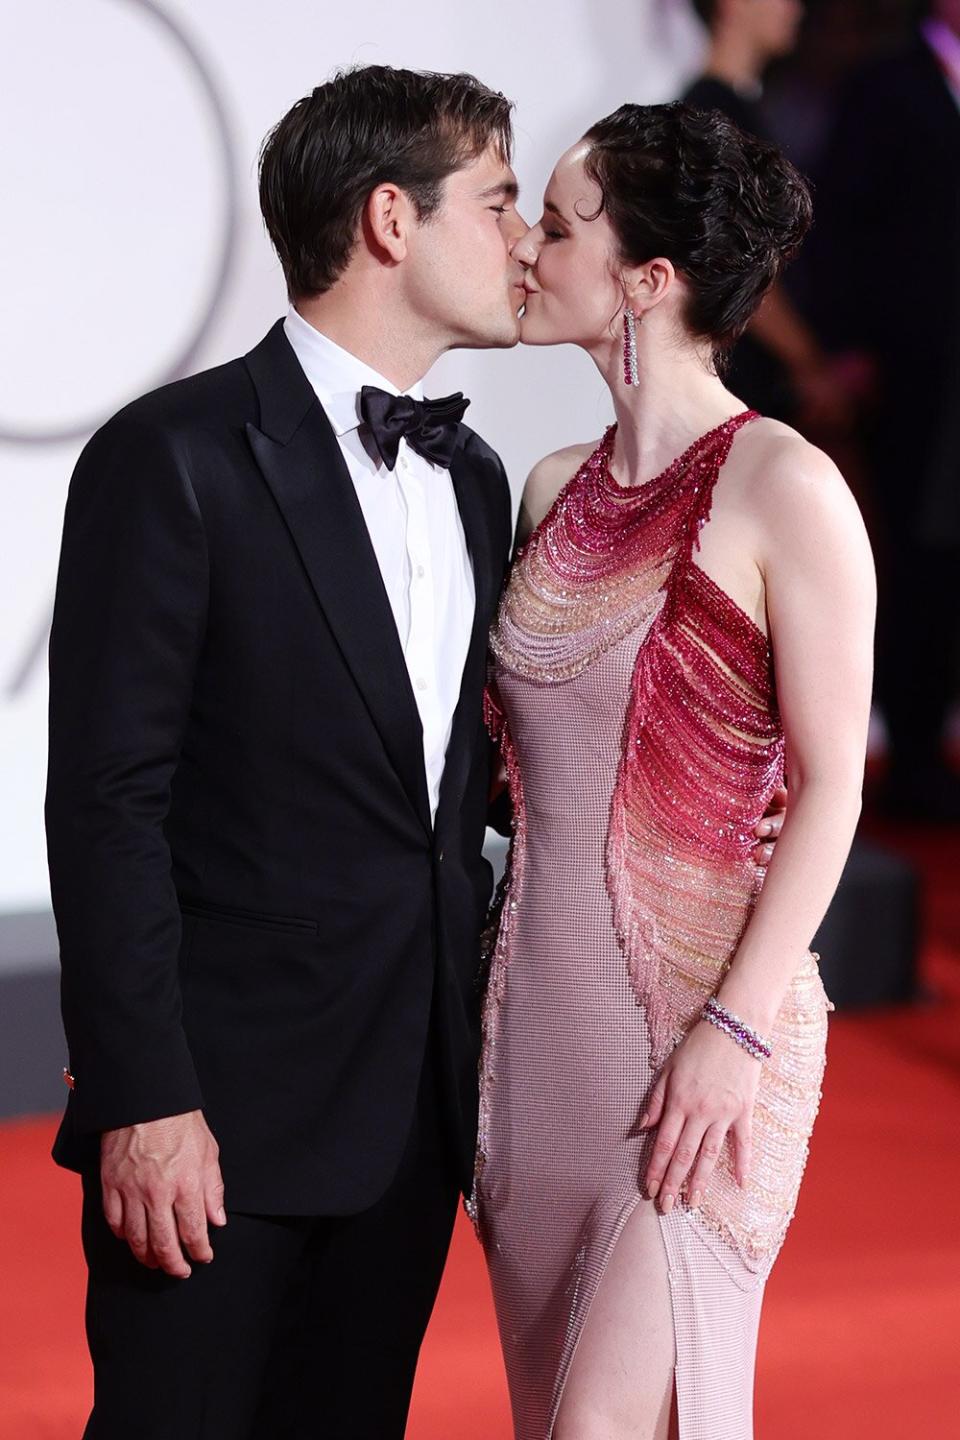 VENICE, ITALY - SEPTEMBER 06: Jason Ralph and Rachel Brosnahan attend the "Dead For A Dollar" red carpet at the 79th Venice International Film Festival on September 06, 2022 in Venice, Italy. (Photo by Andreas Rentz/Getty Images)